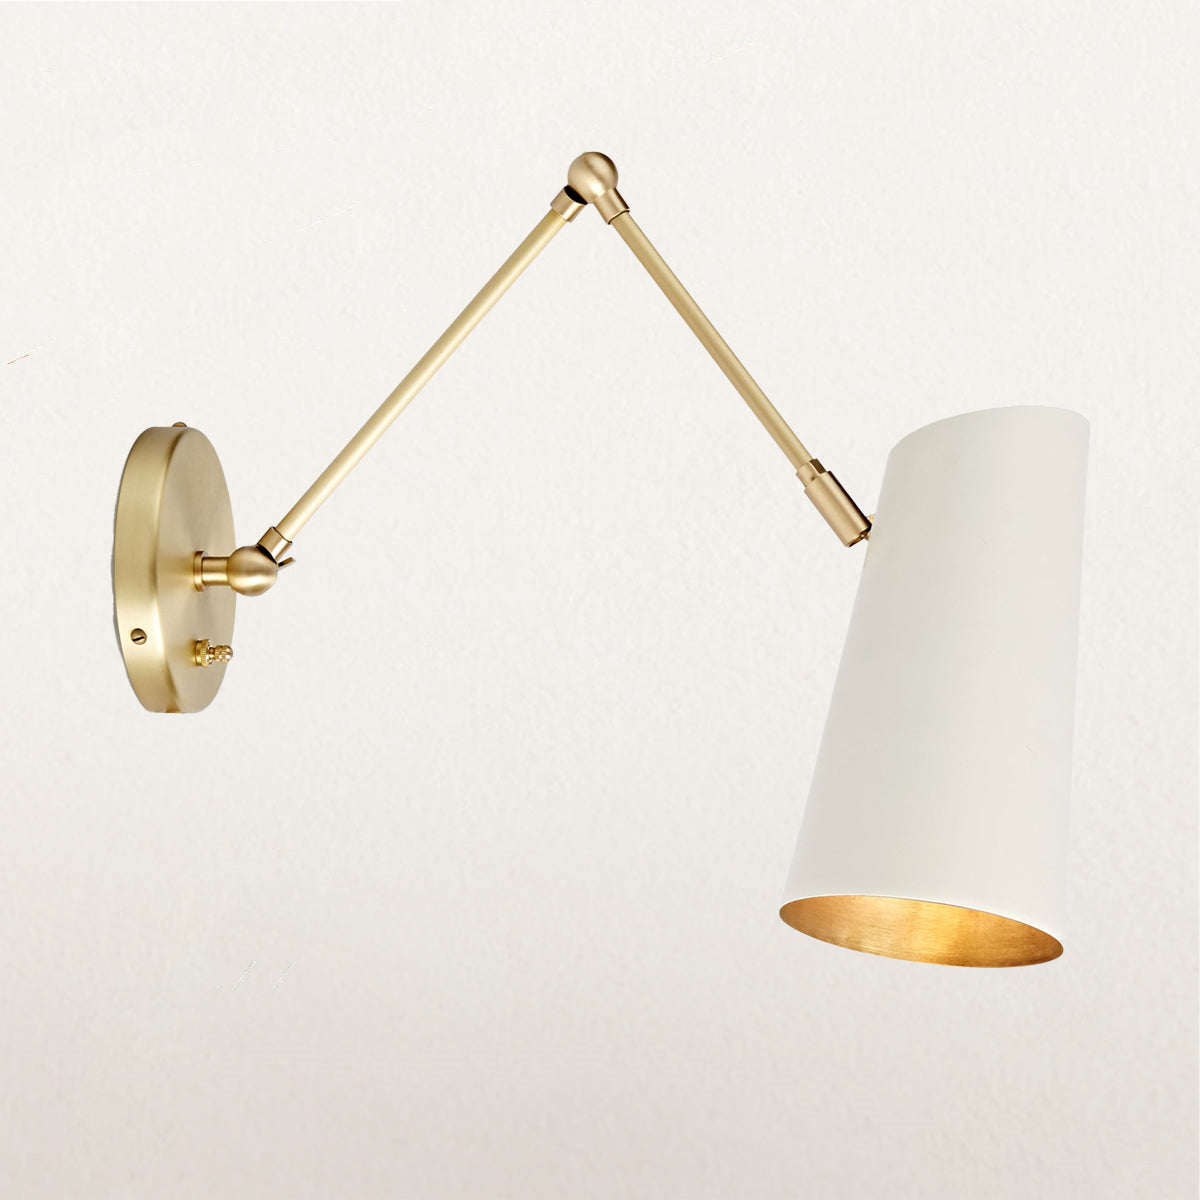 Metal Swing Arm Sconce, Articulating Sconce